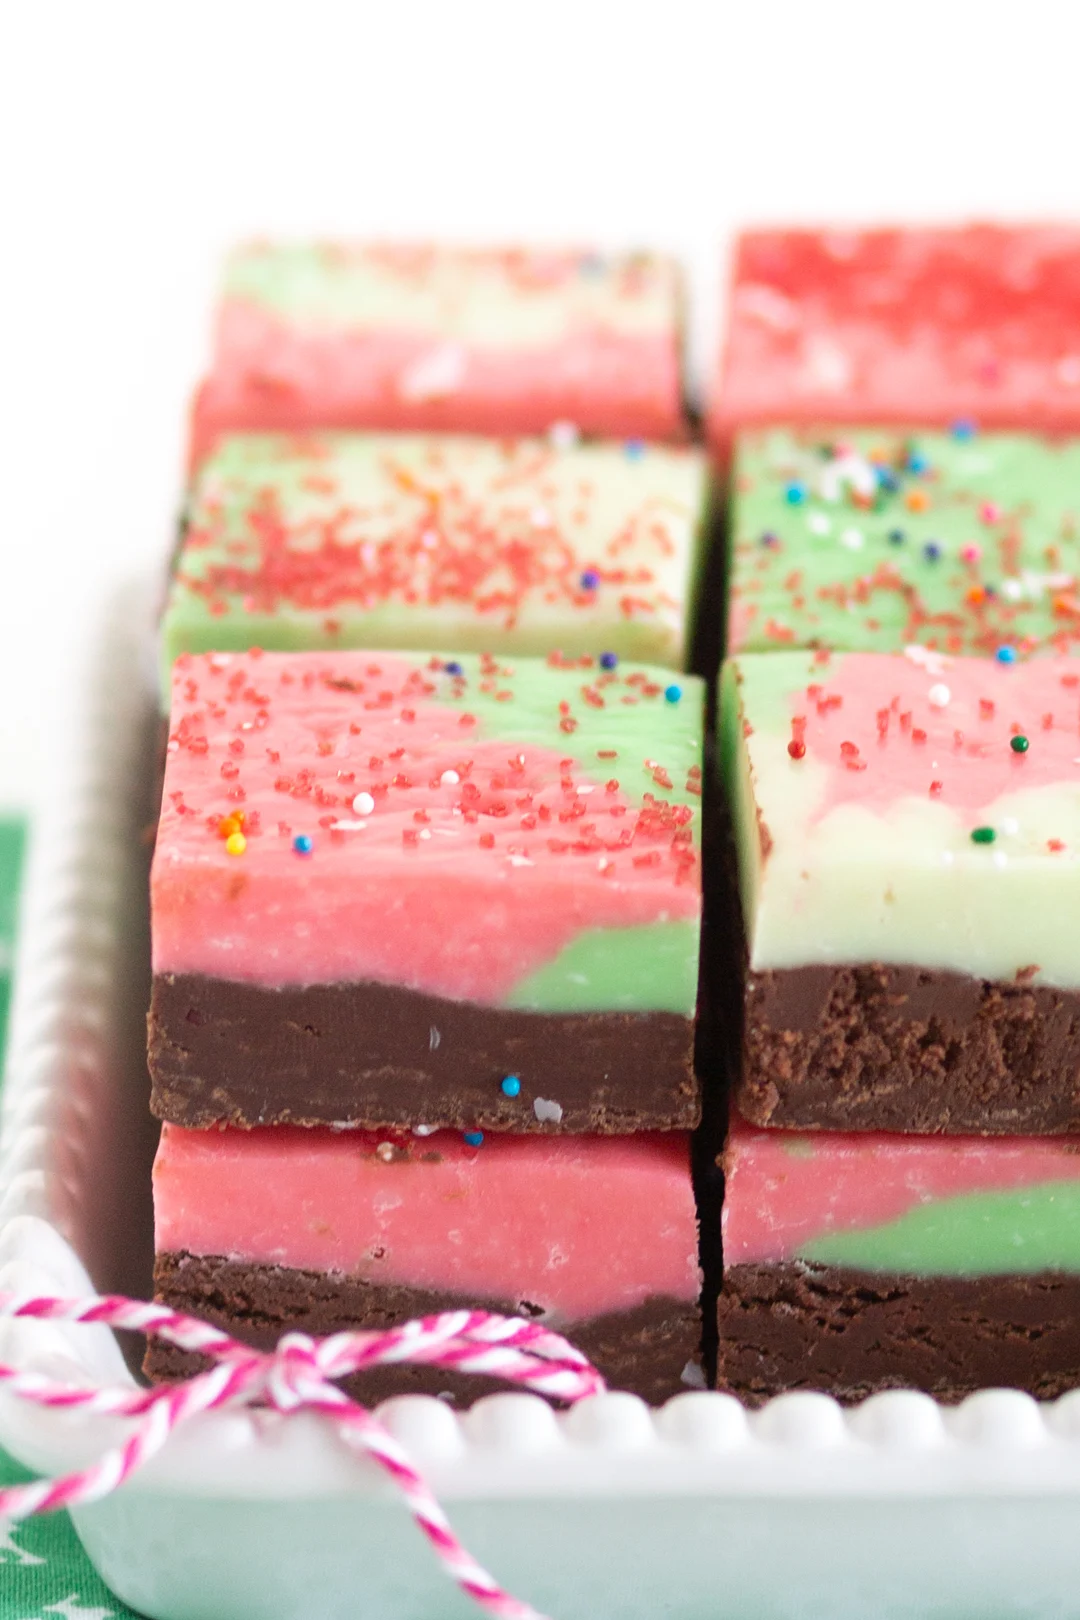 super close view of a stack of christmas fudge. two layered fudge. bottom layer, all chocolate. top layer white chocolate tinted red and green and swirled. Topped with variety of sprinkles.